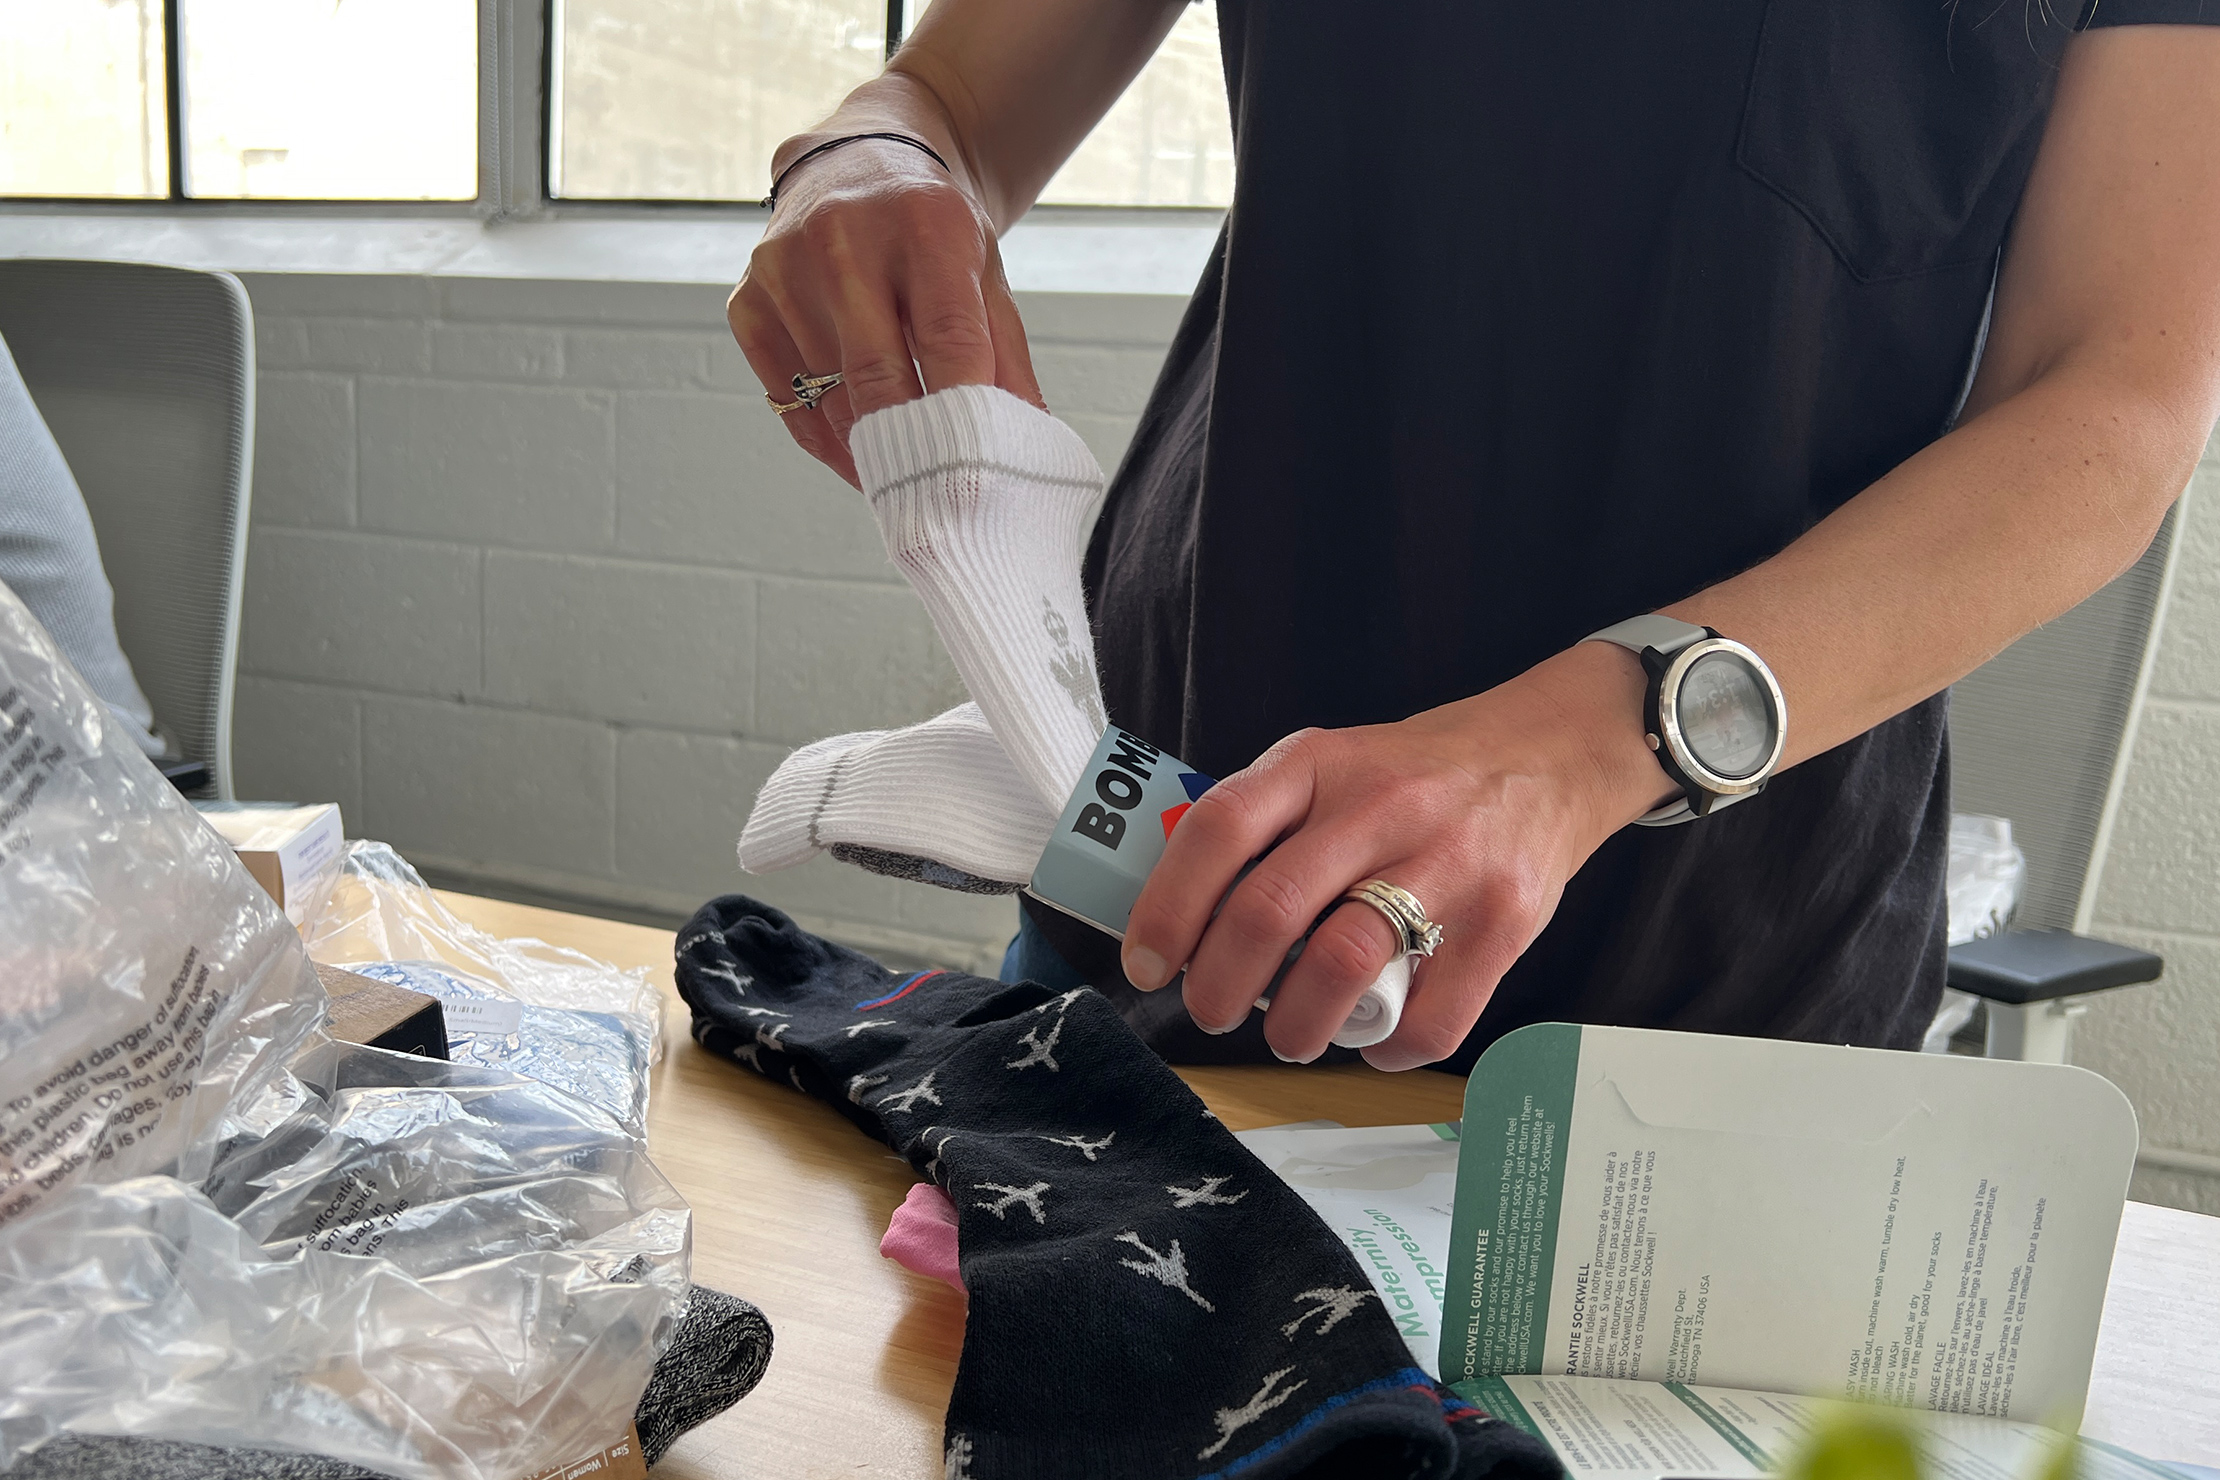 We’ve rolled our sleeves and unrolled these socks for testing.